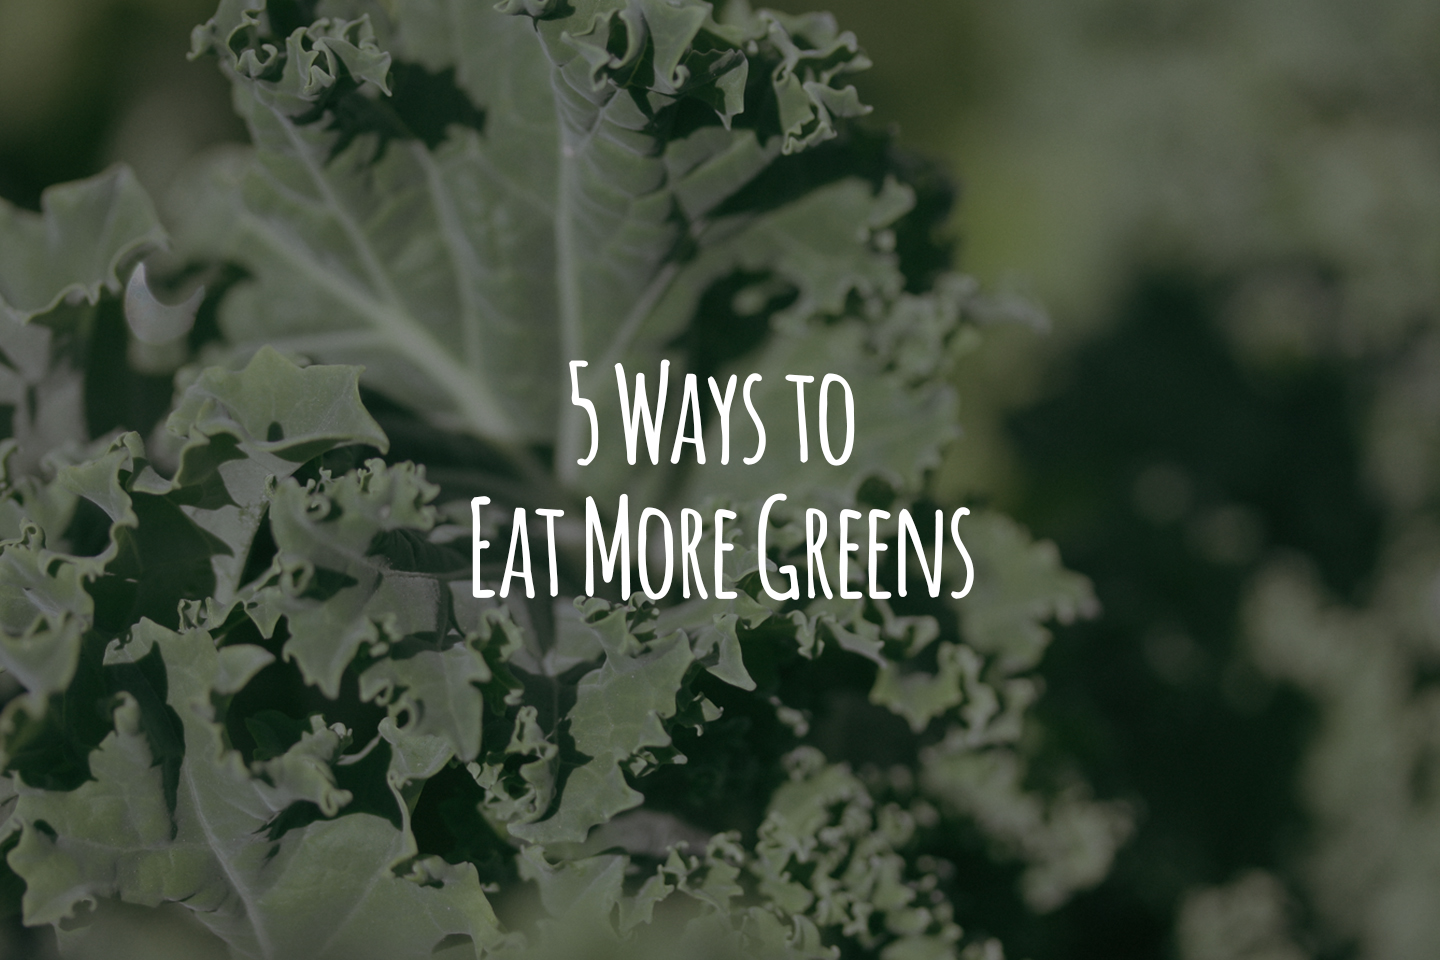 5 Ways to Eat More Greens